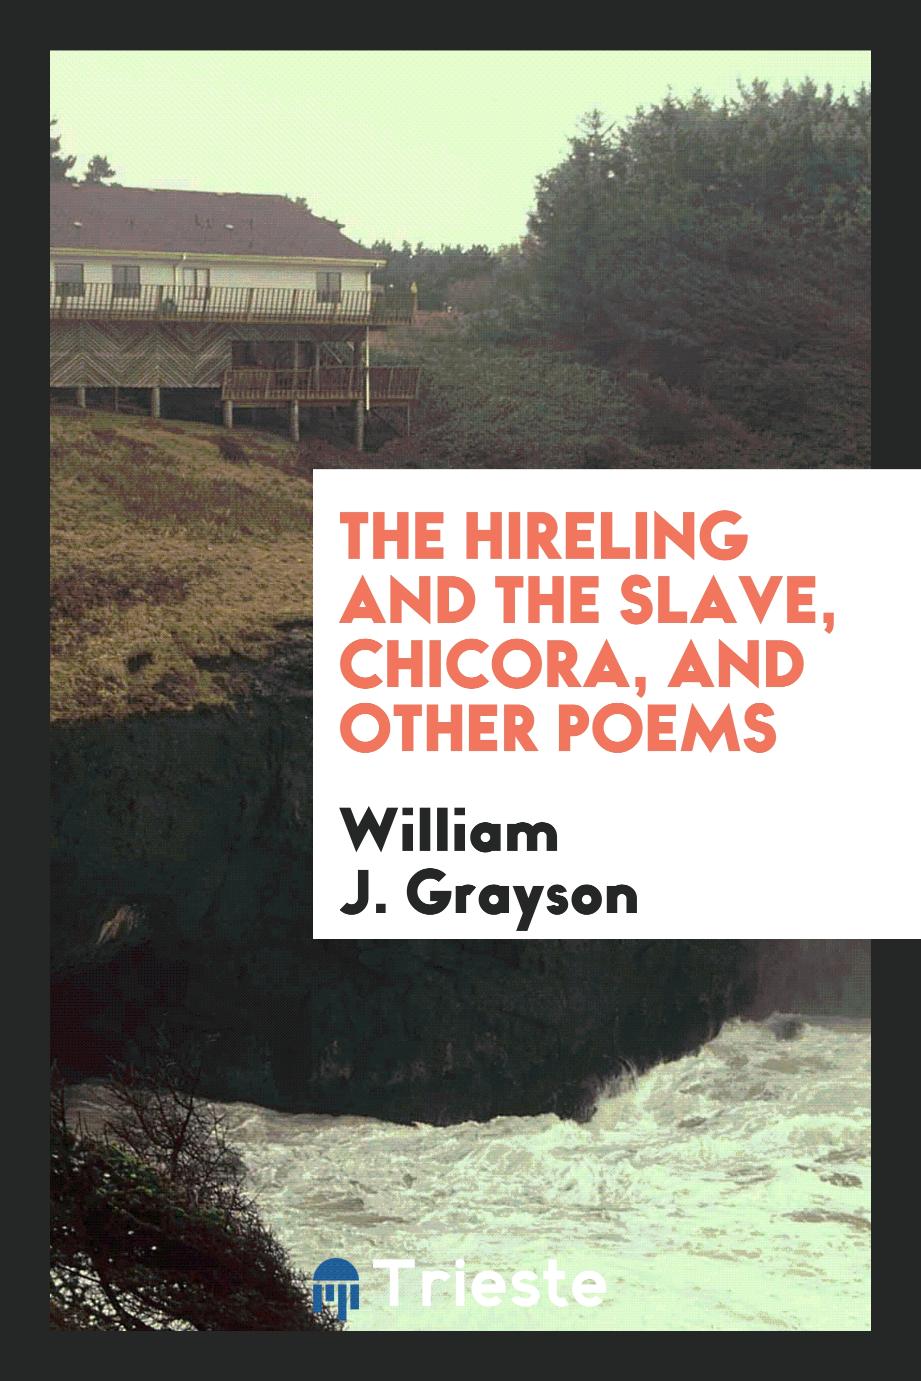 The Hireling and the Slave, Chicora, and Other Poems